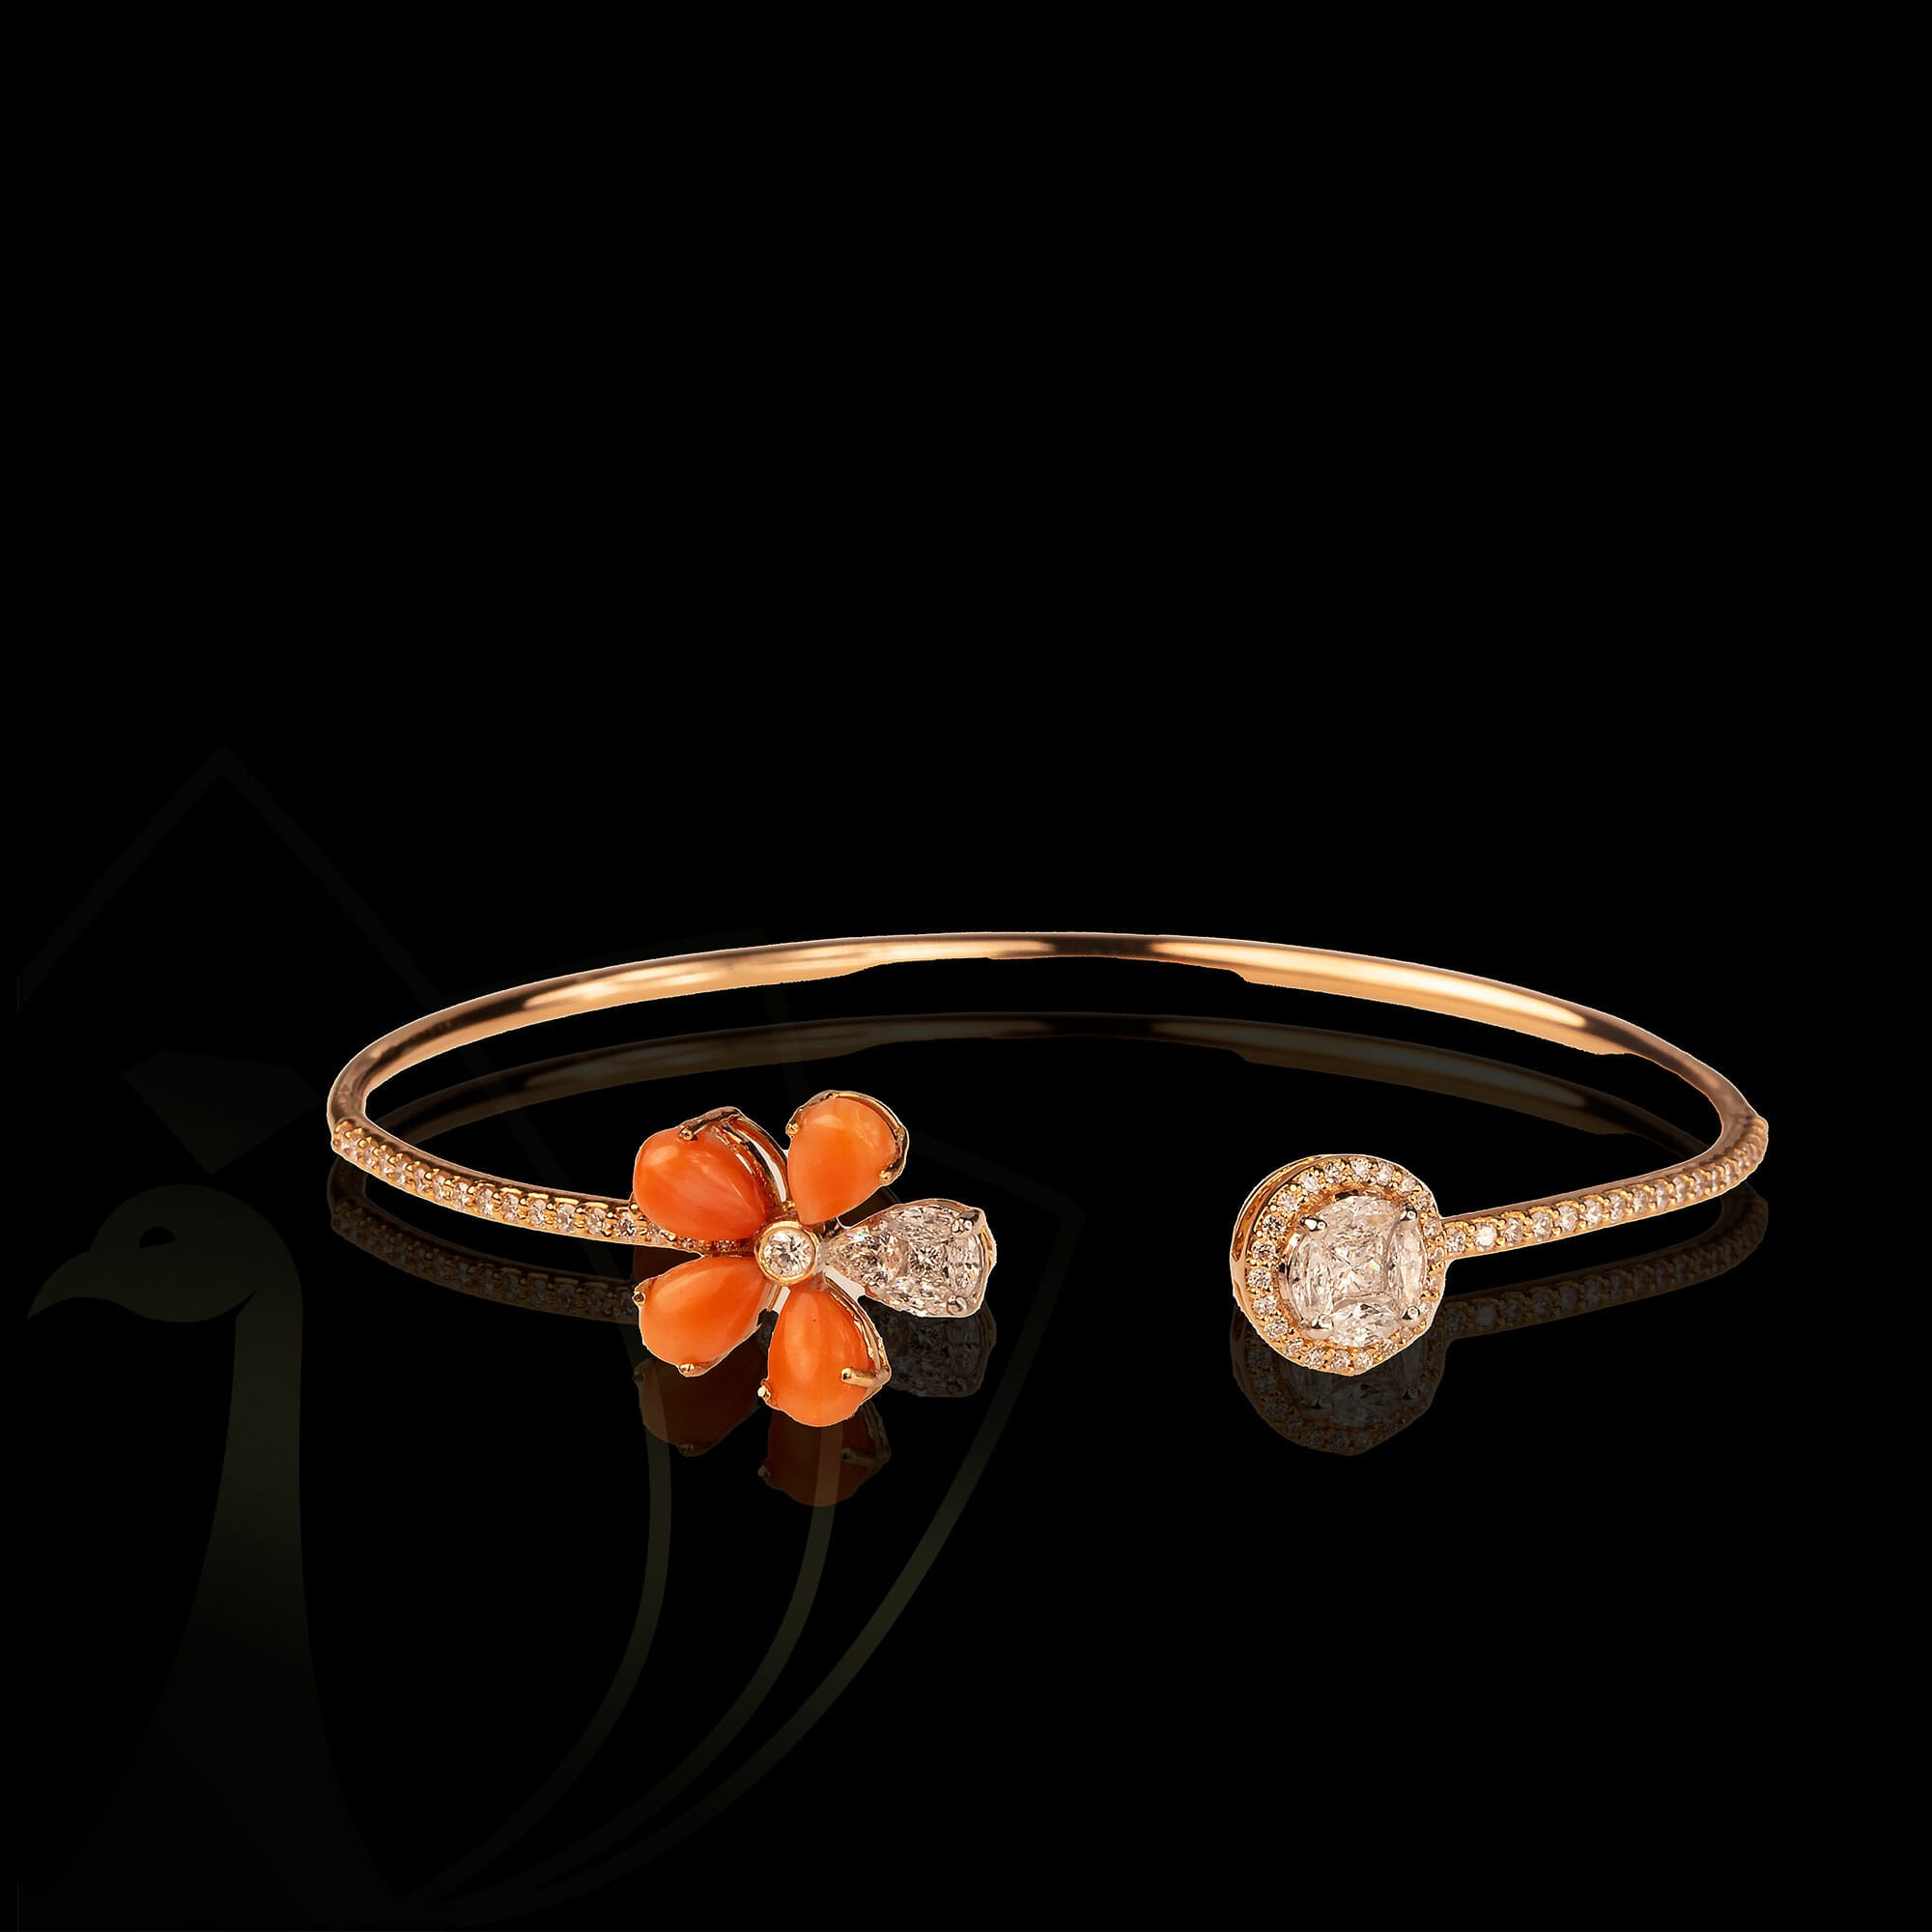 A bountiful blossom diamond bracelet with coral pears.